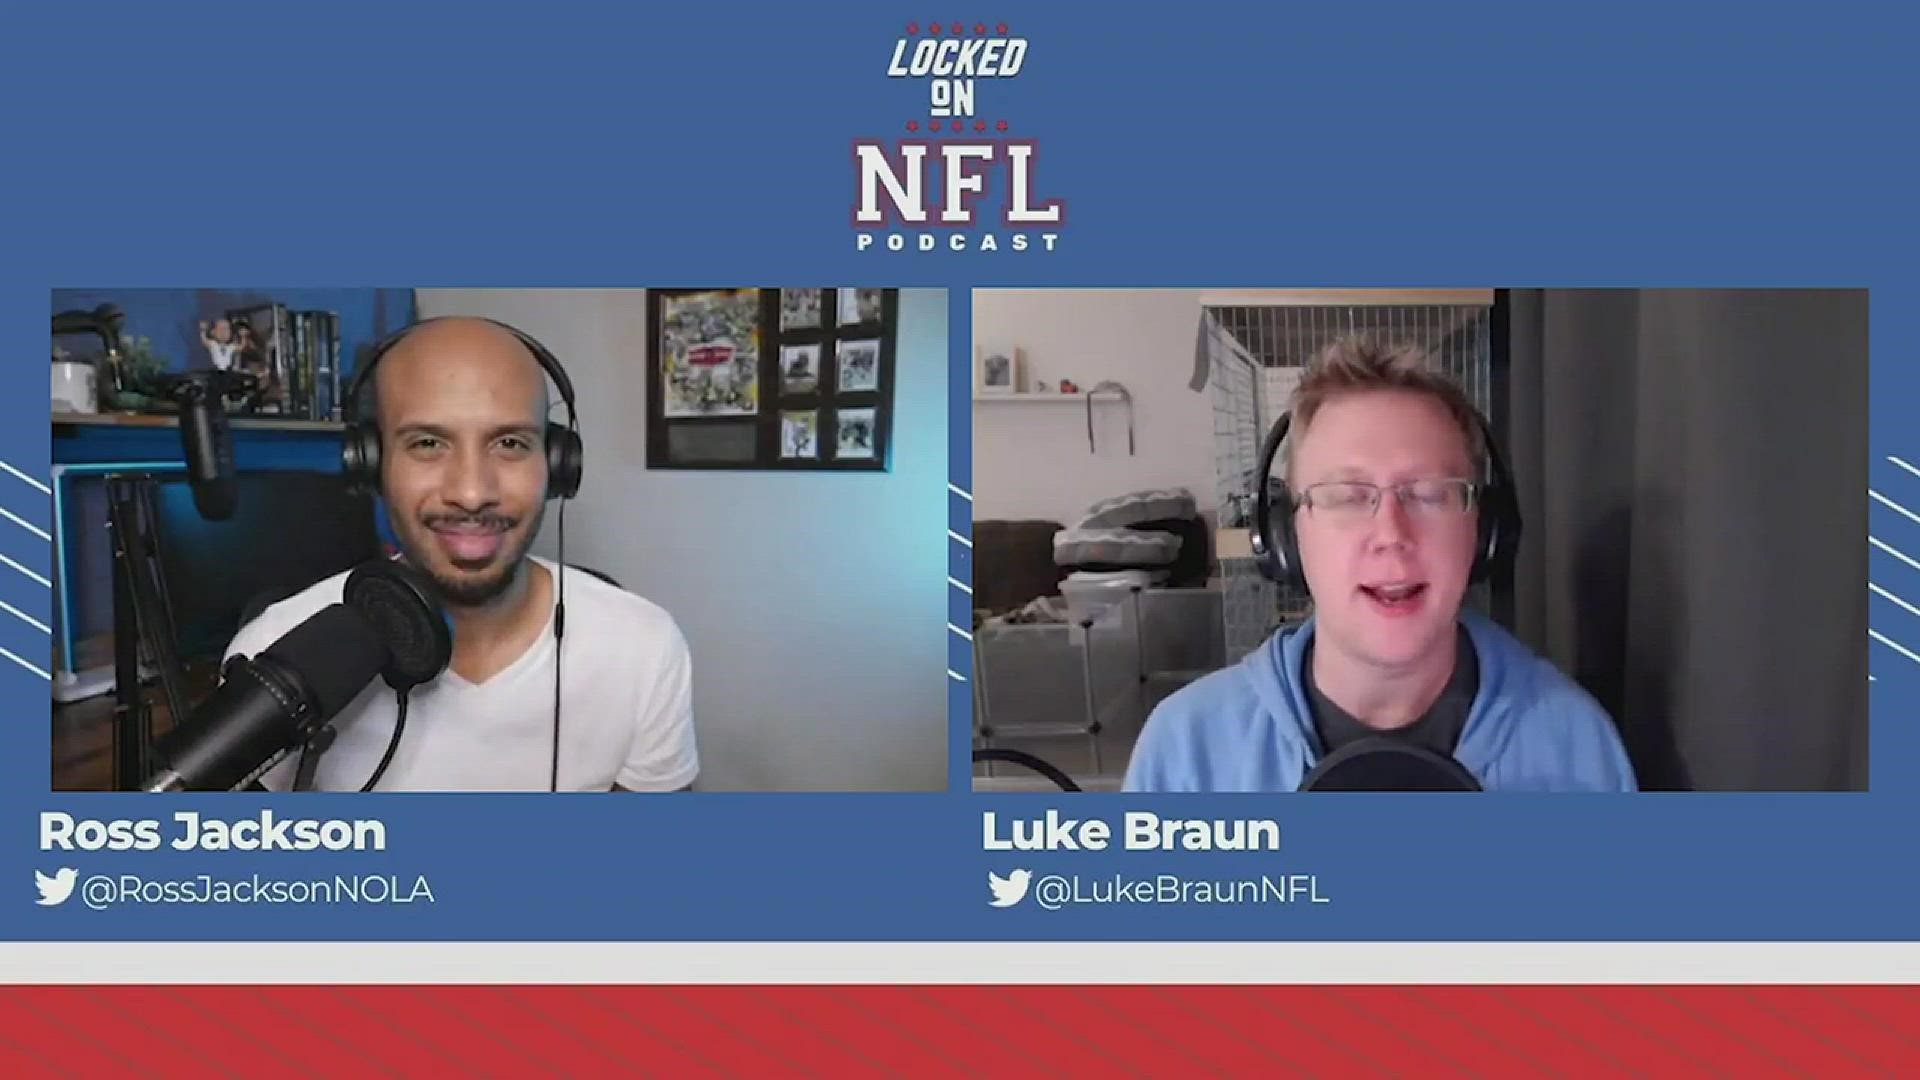 Luke and Ross have some favorite AFC and NFC playoff scenarios. Some outstanding first round matchups await in both conferences.